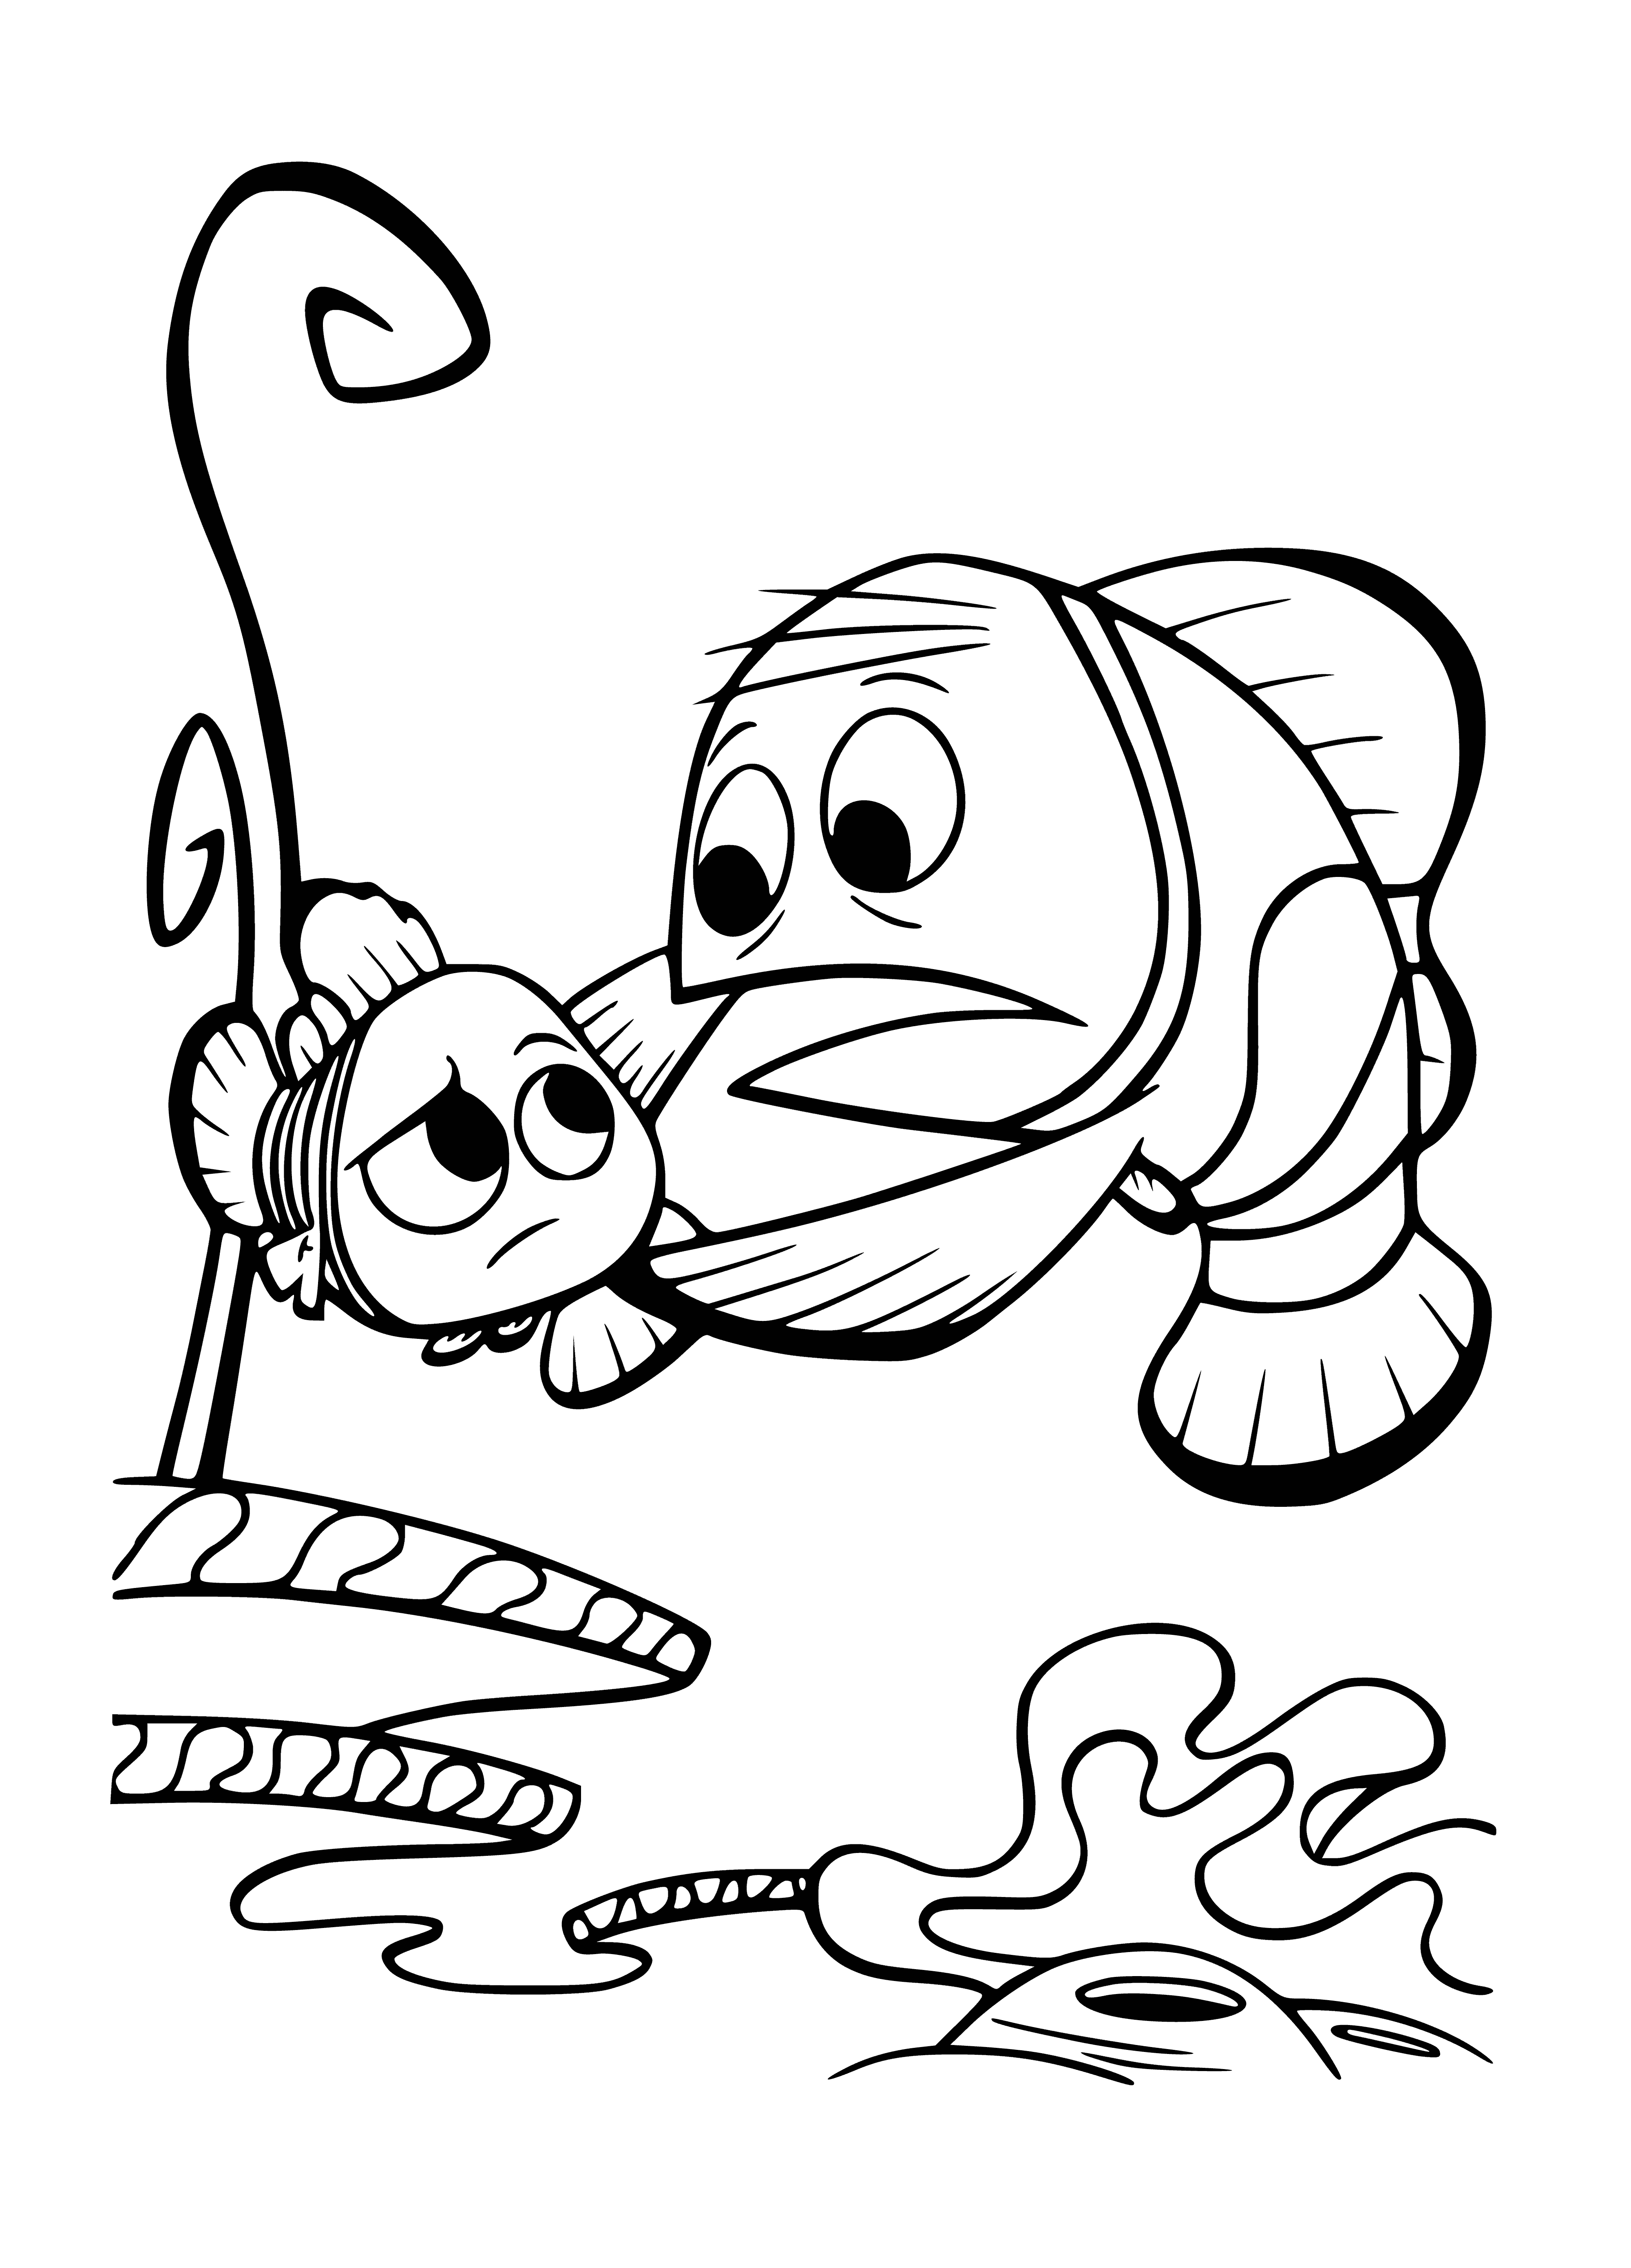 Caring father coloring page